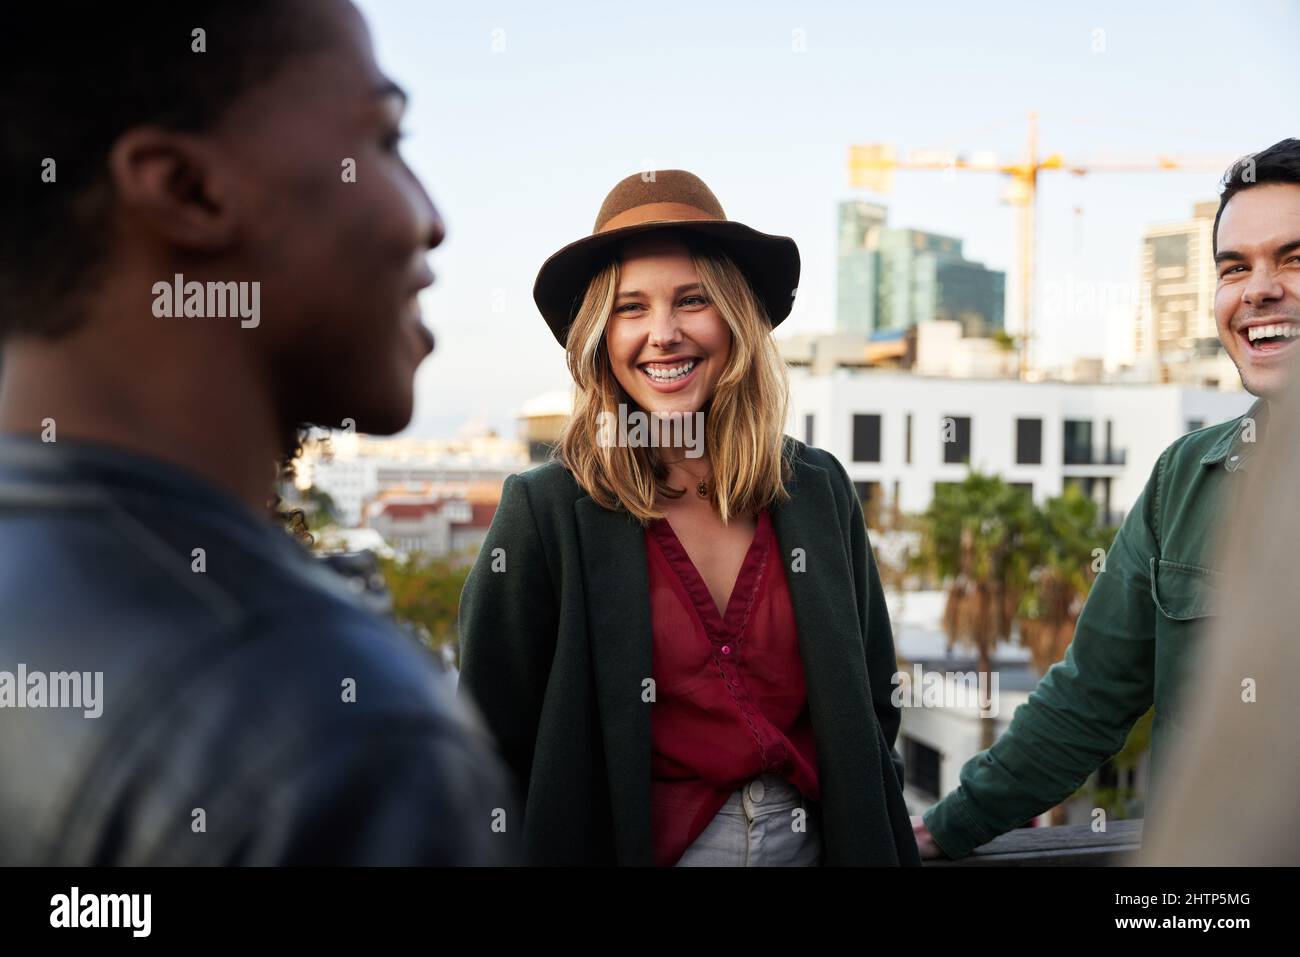 Caucasian female smiling with group of multi-cultural friends socializing on a rooftop terrace at dusk. Stock Photo